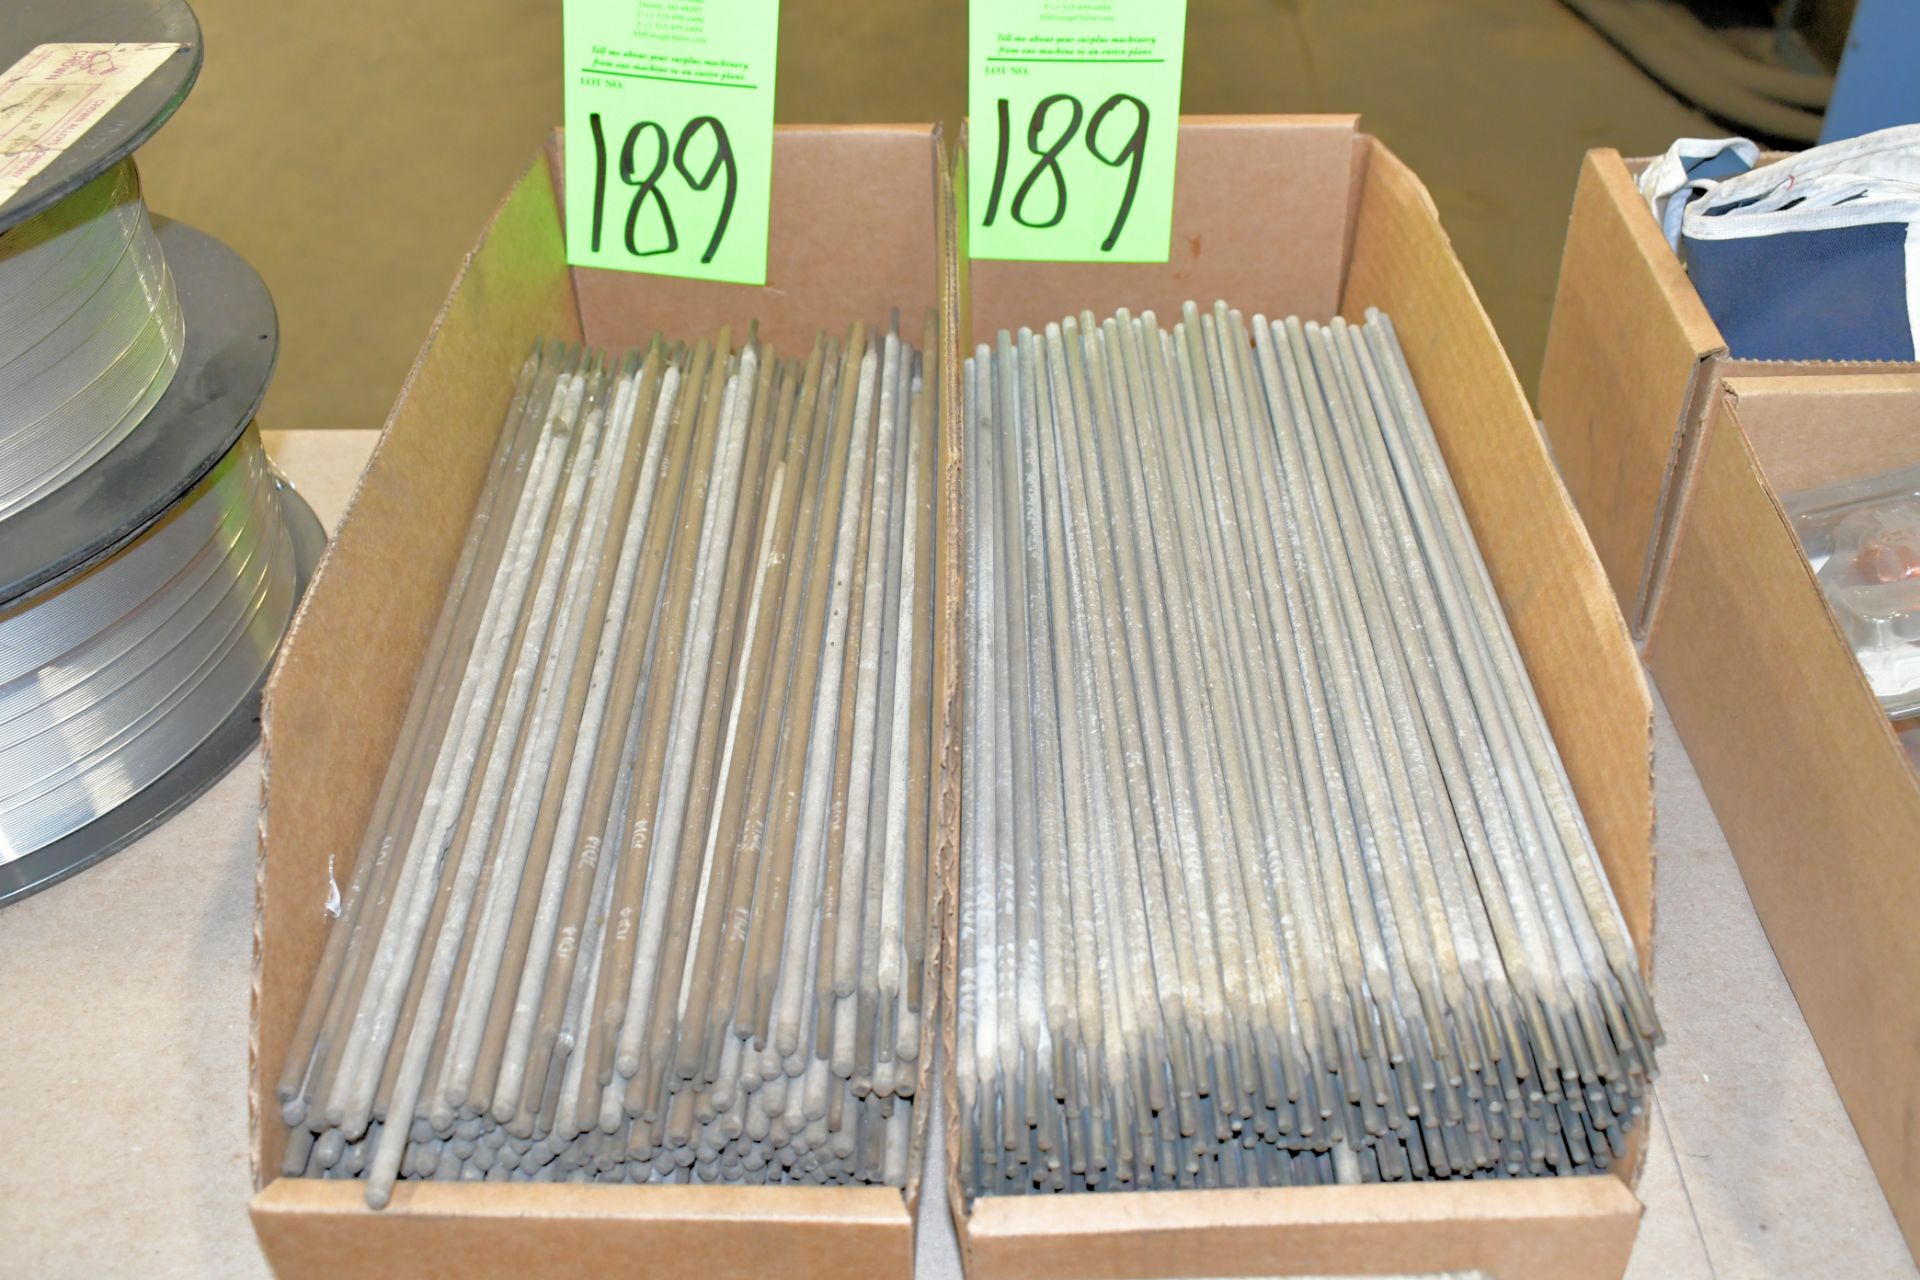 Lot-14" Stick Welding Rods in (2) Boxes